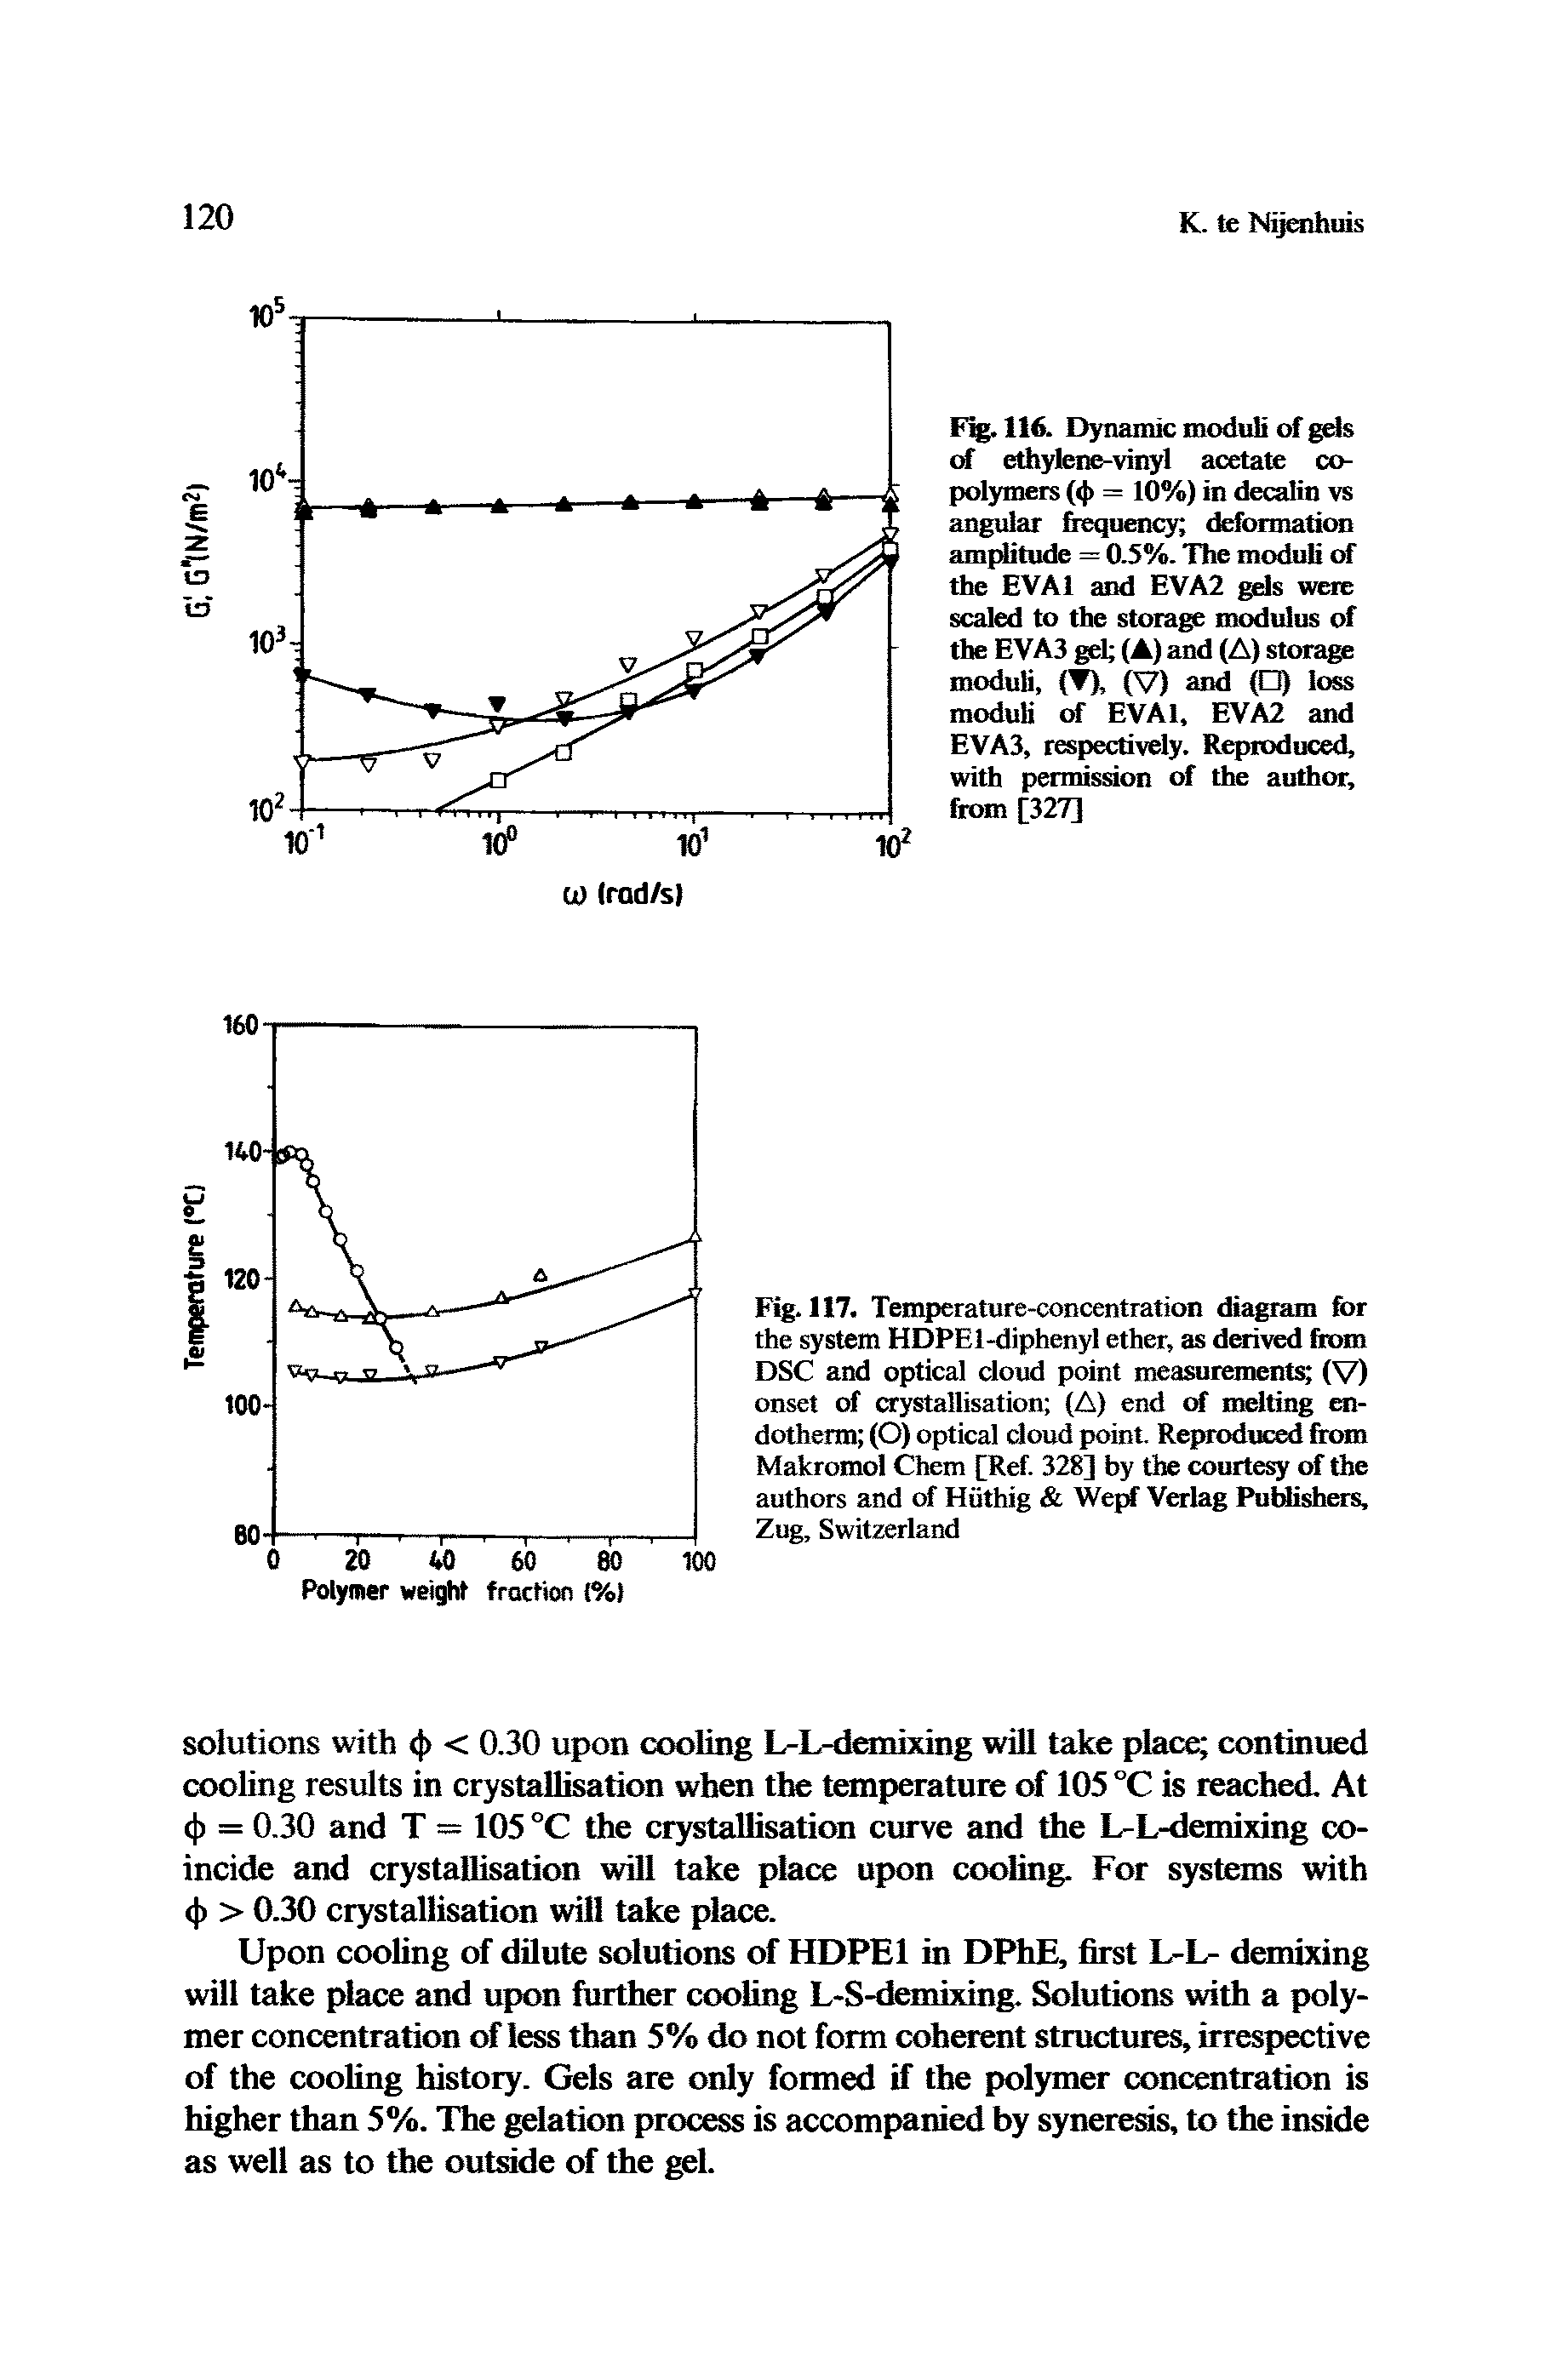 Fig. 117. Temperature-concentration diagram for the system HDPEl-diphenyl ether, as derived from DSC and optical cloud point measurements (V) onset of crystallisation (A) end of melting en-dotherm (O) optical doud point. Reproduced from Makromol Chem [Ref. 328] by the courtesy of the authors and of Huthig We Verlag PuWshers, Zug, Switzerland...